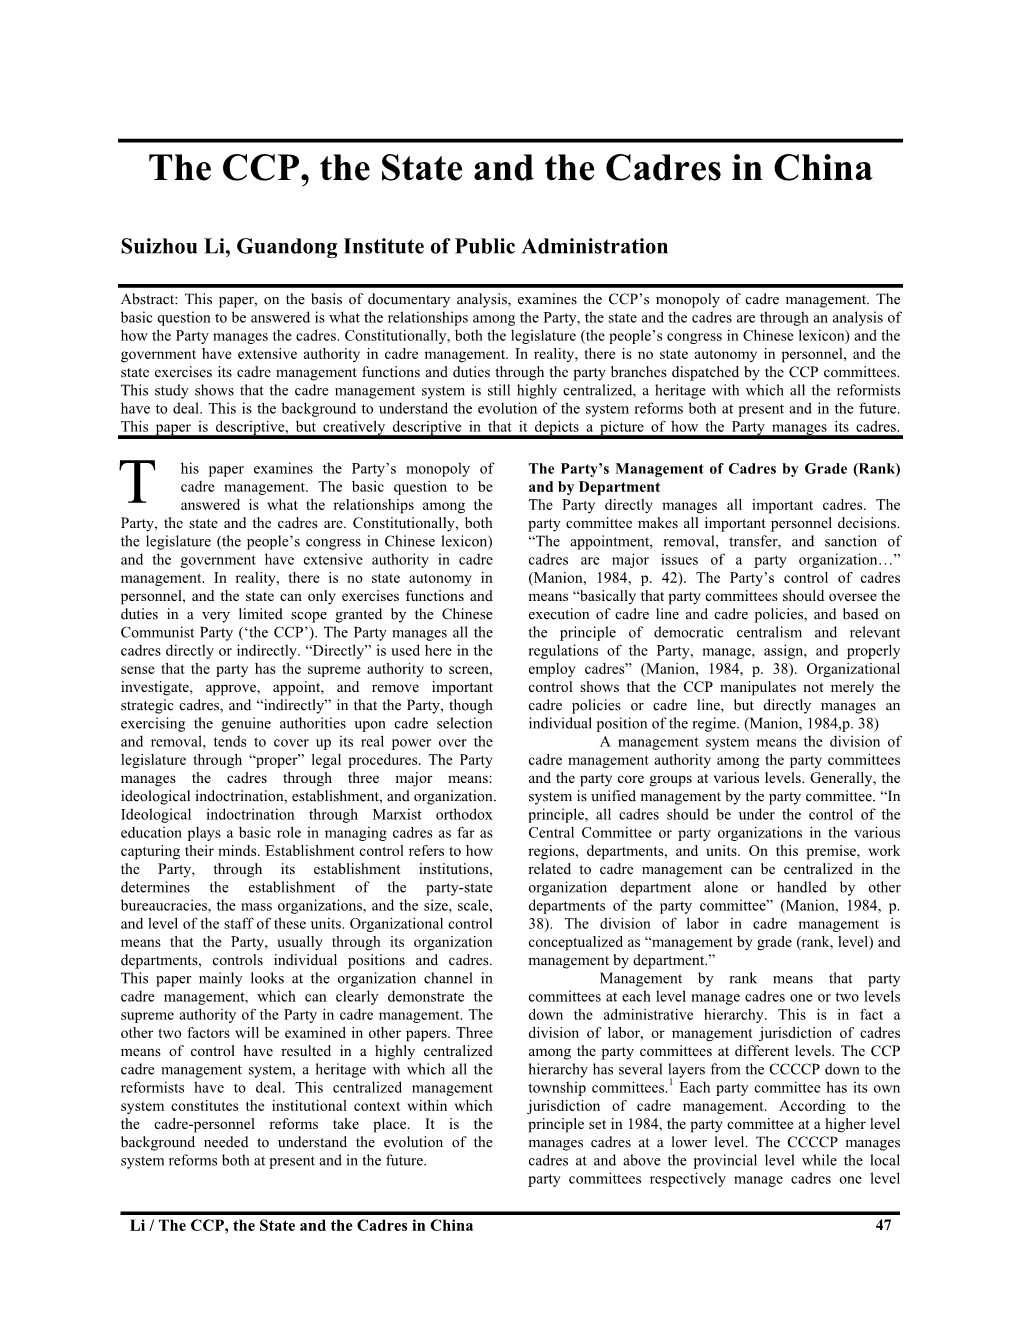 The CCP, the State and the Cadres in China